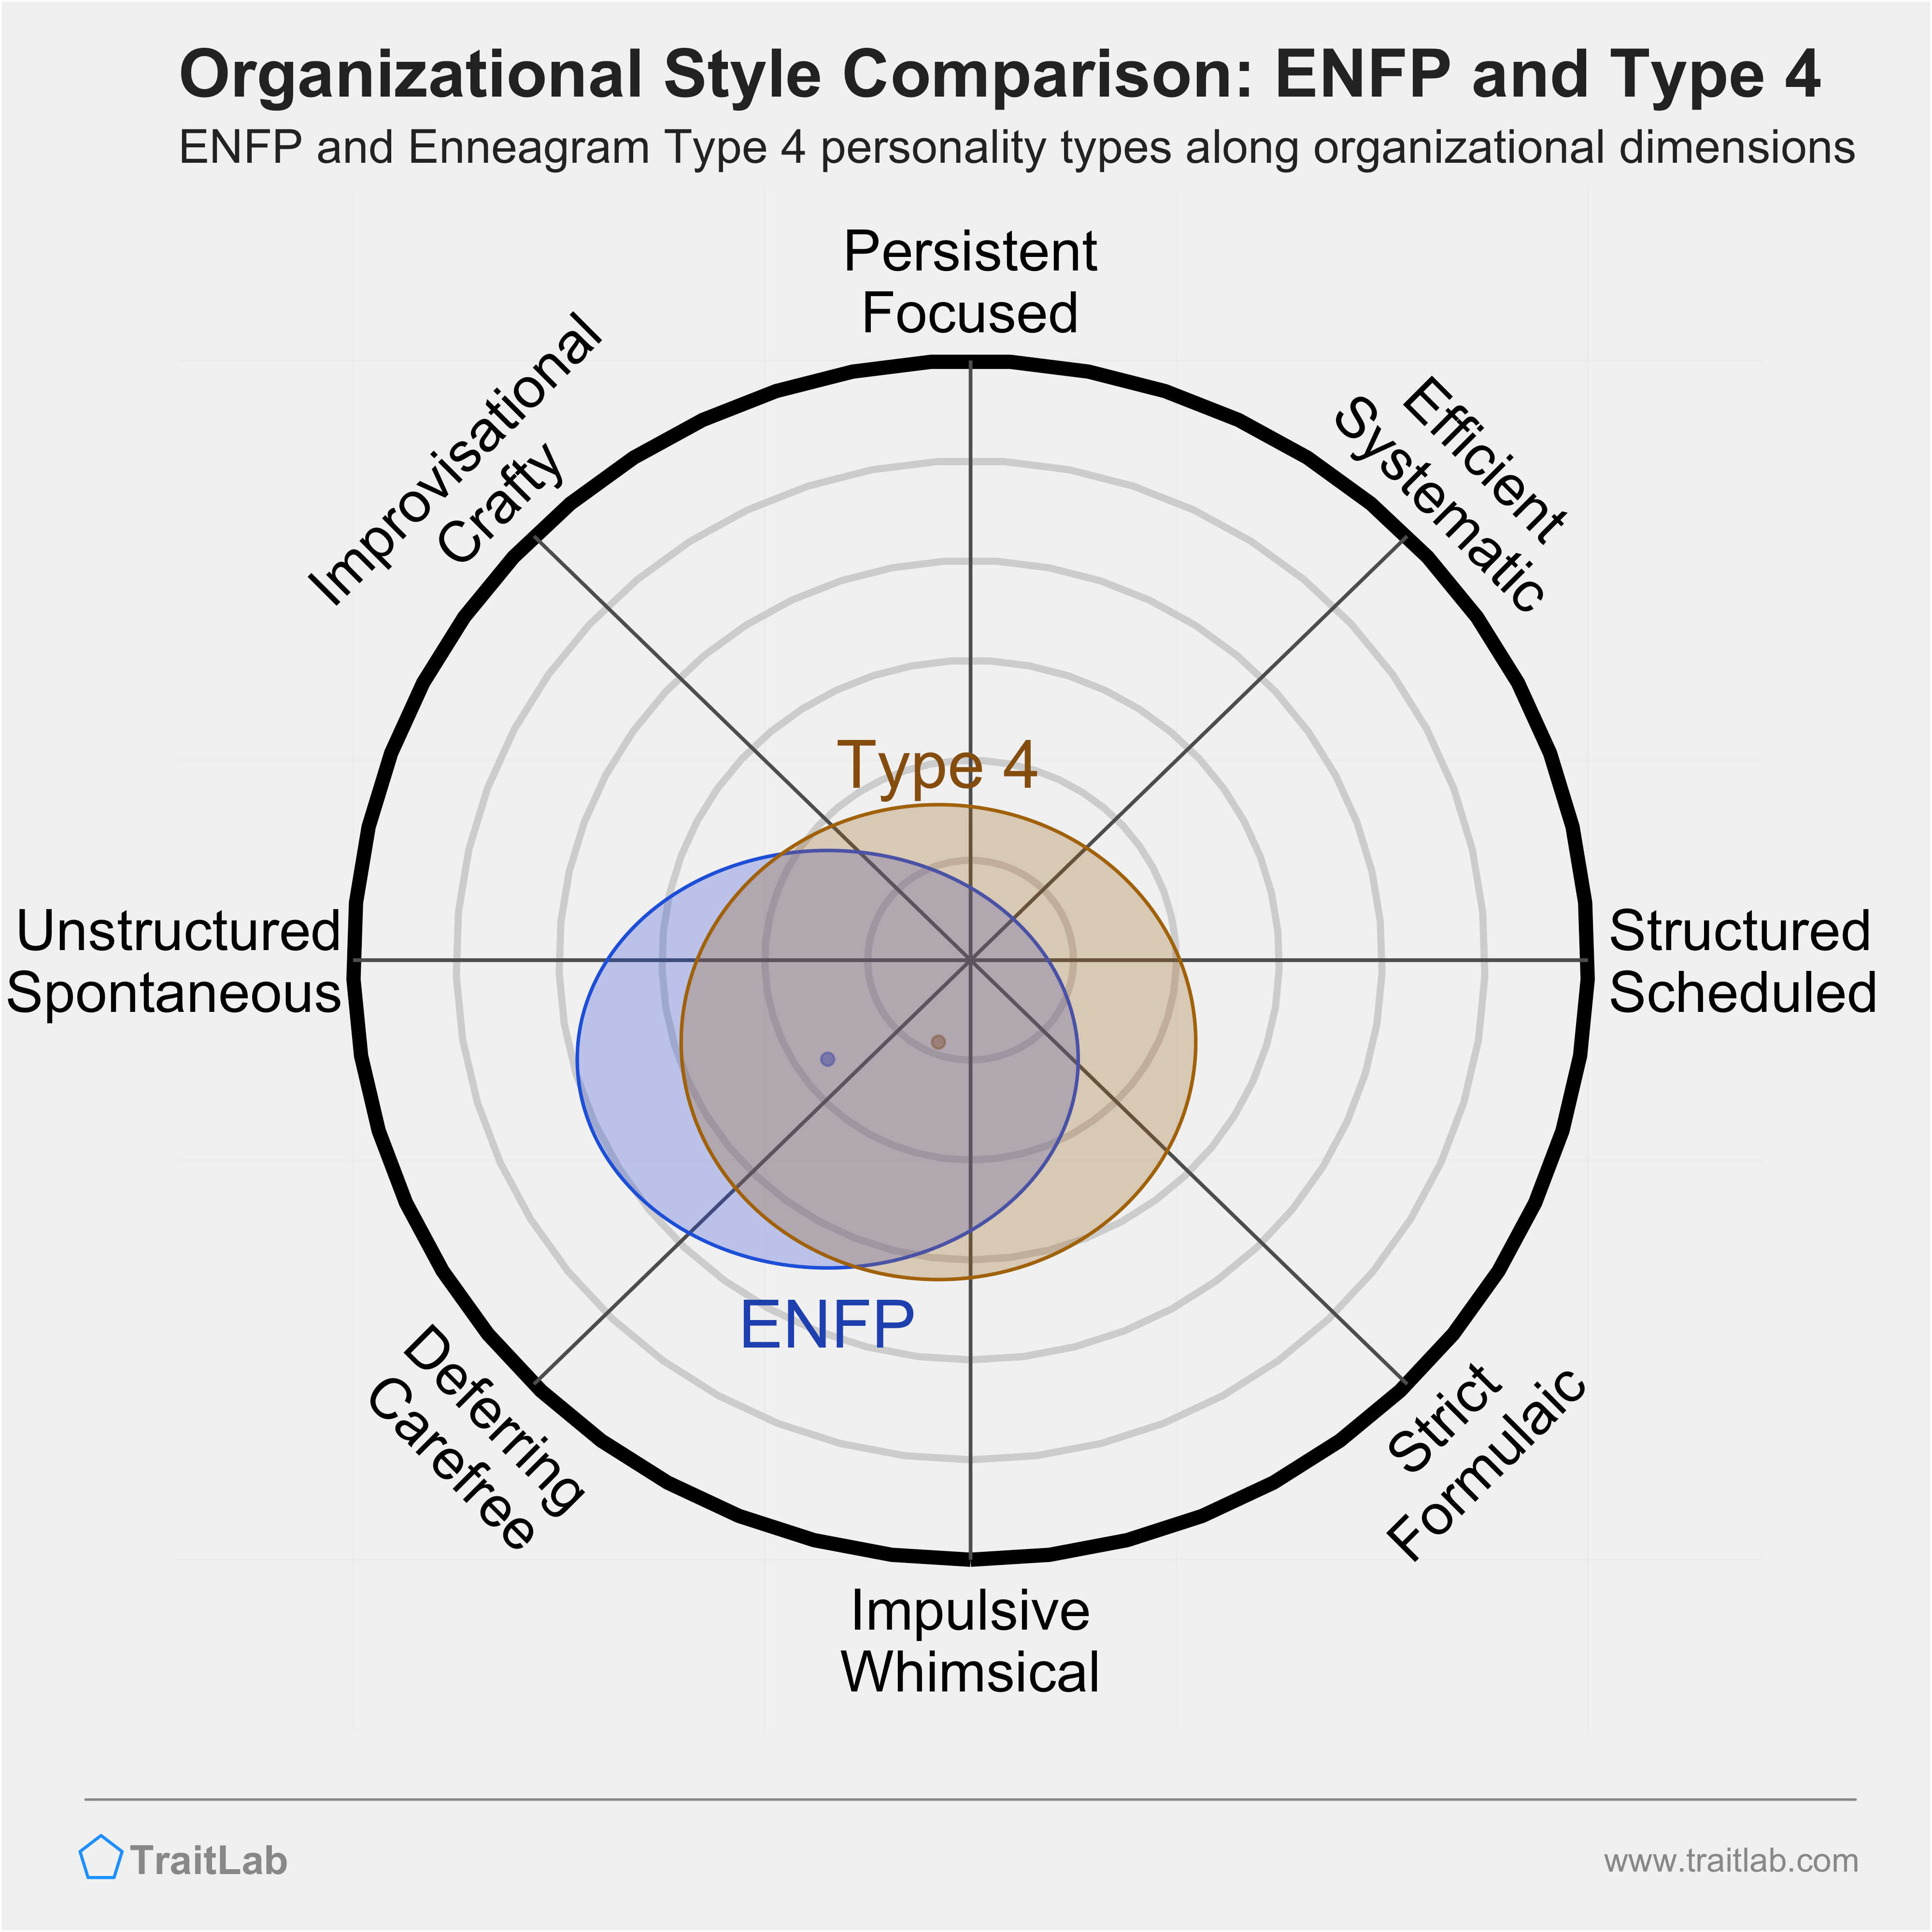 ENFP and Type 4 comparison across organizational dimensions